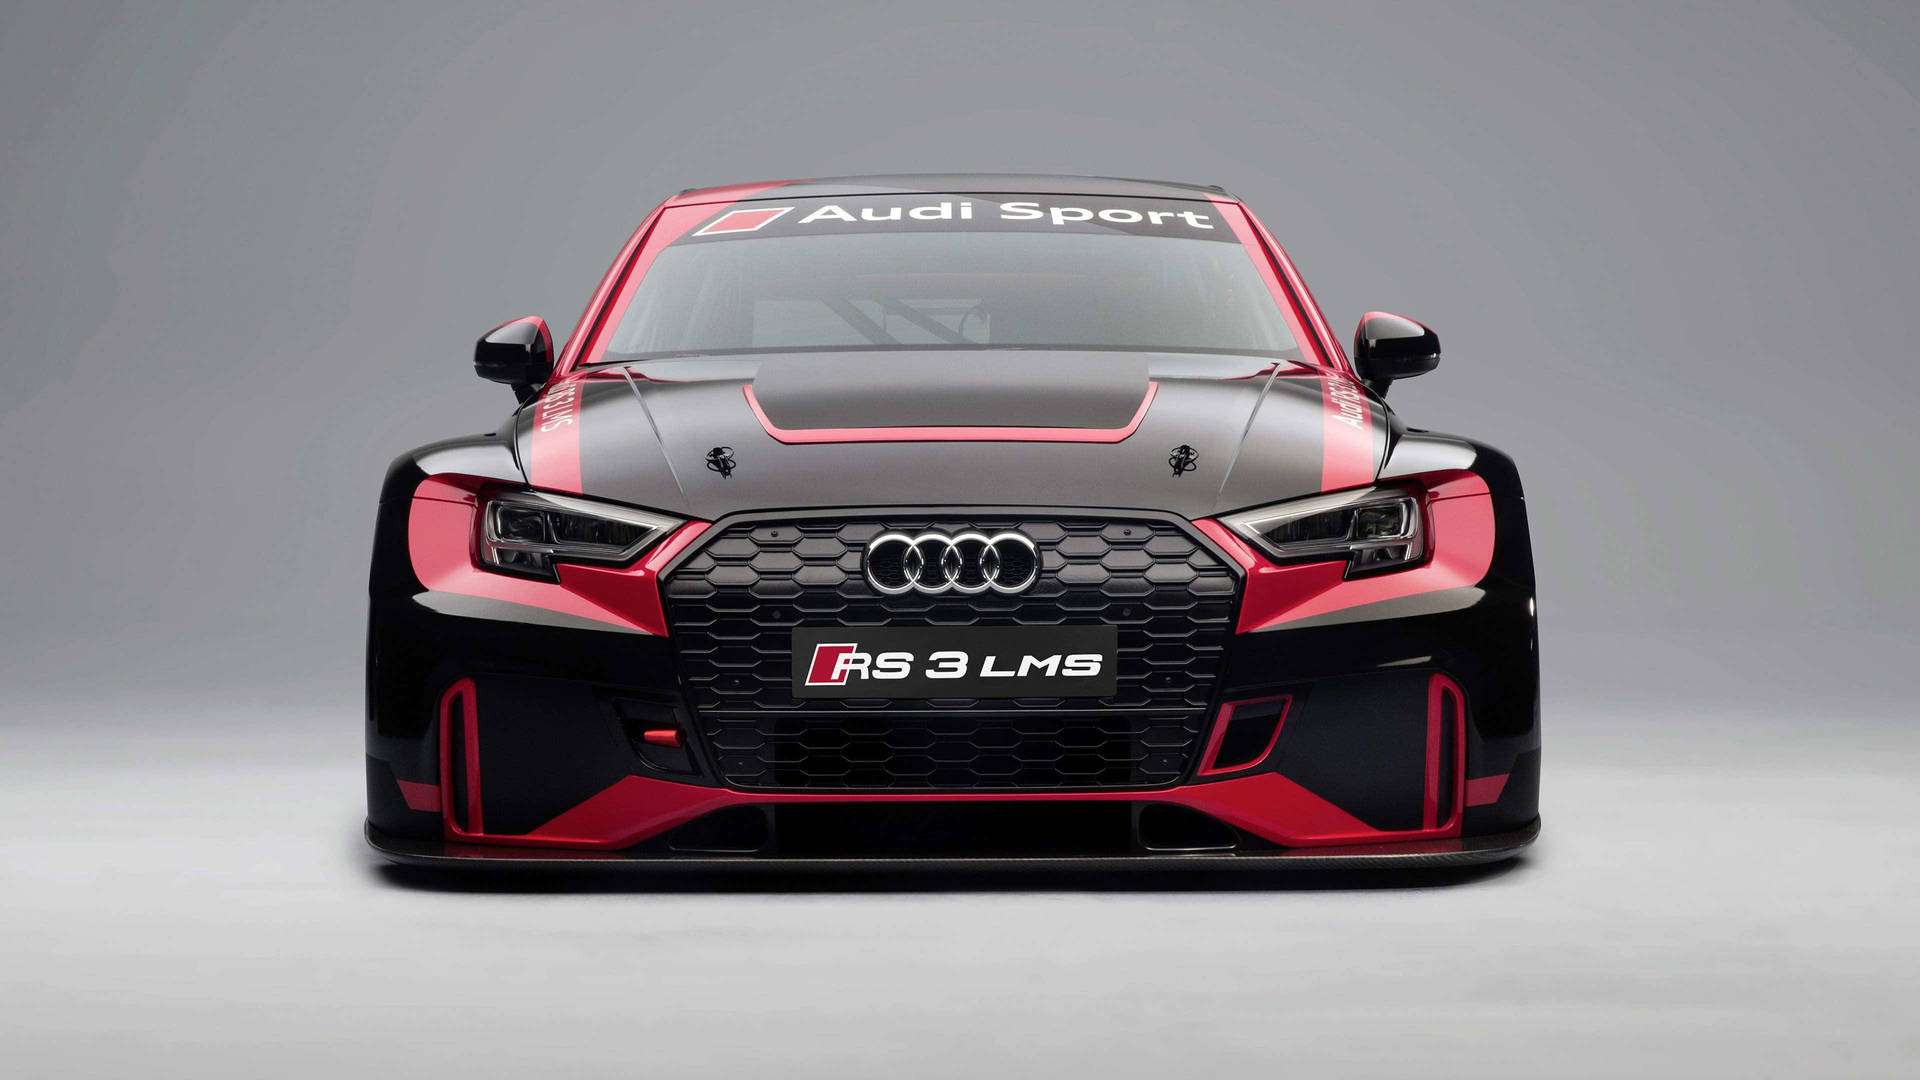 Audi Rs 3 Lms Front View Background